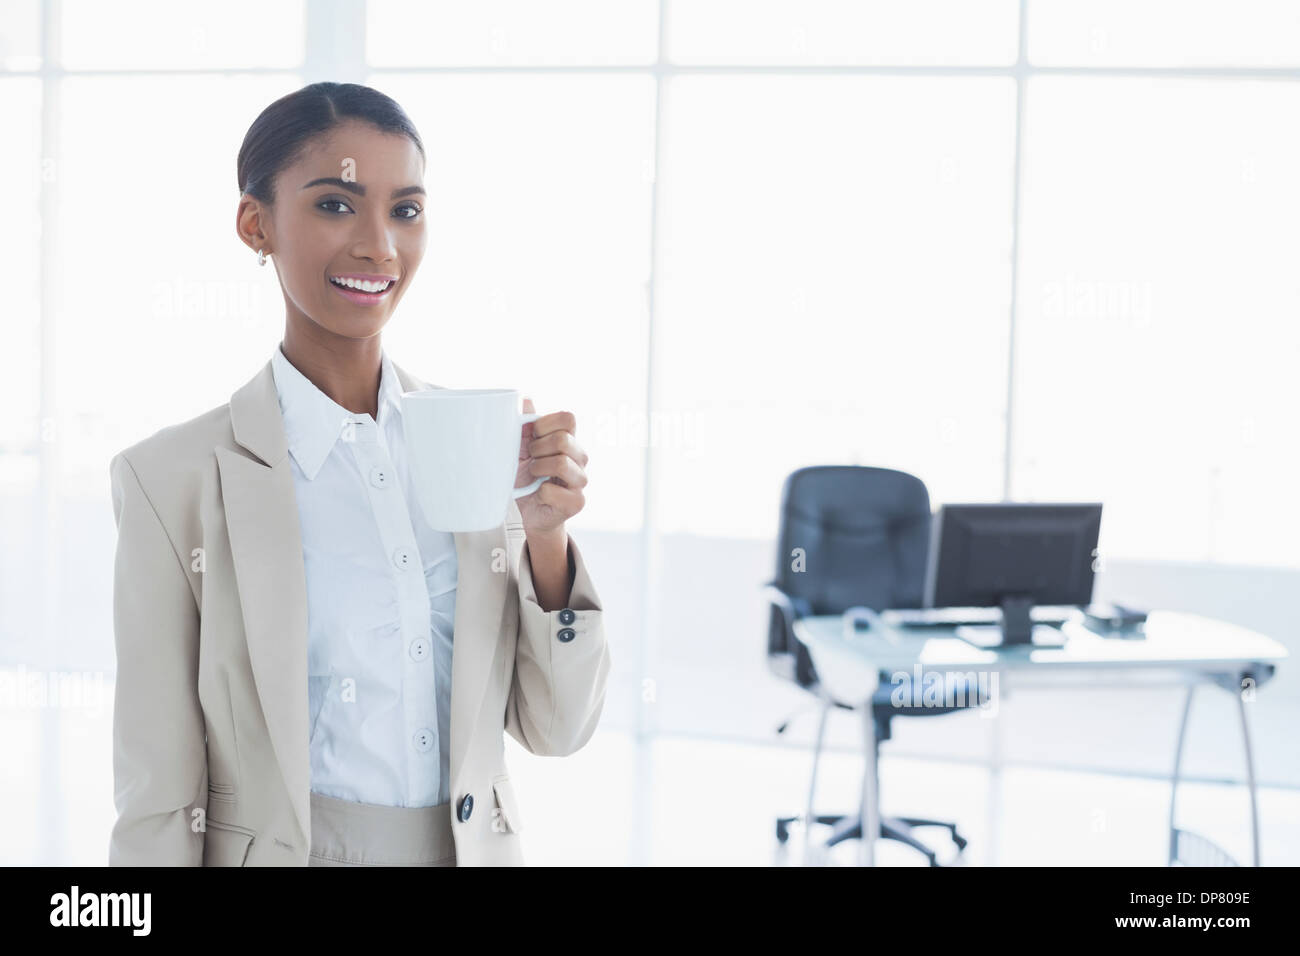 Smiling elegant businesswoman holding cup of coffee Stock Photo